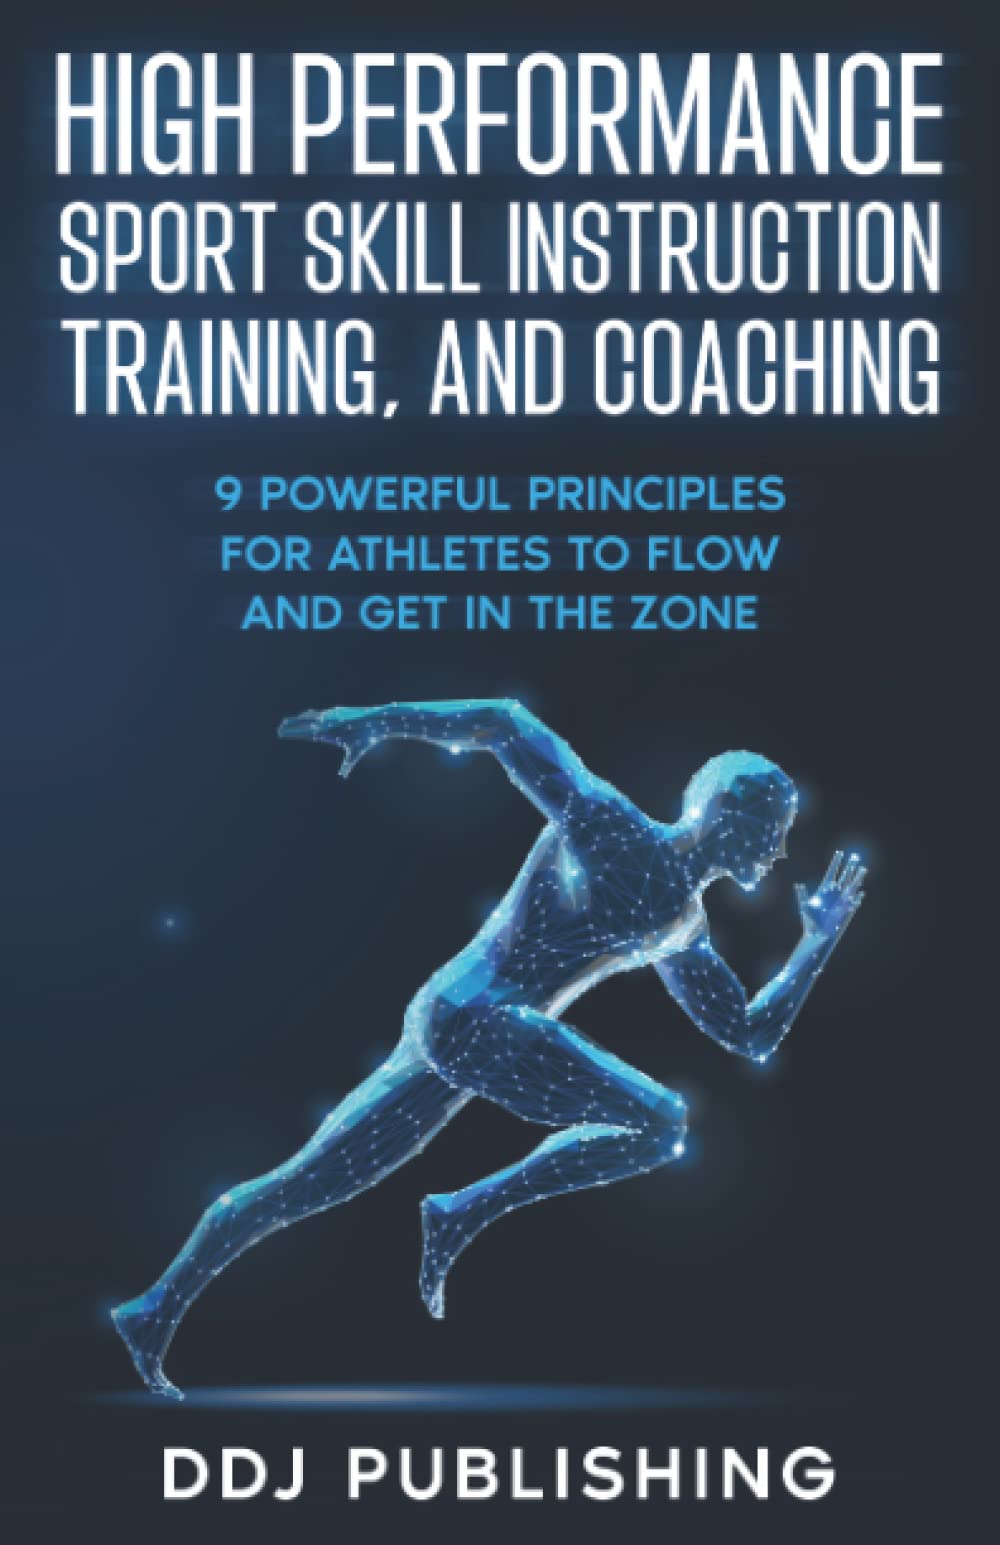 High Performance Sport Skill Instruction, Training and Coaching: 9 Principles for Athletes to Flow and Get in the Zone